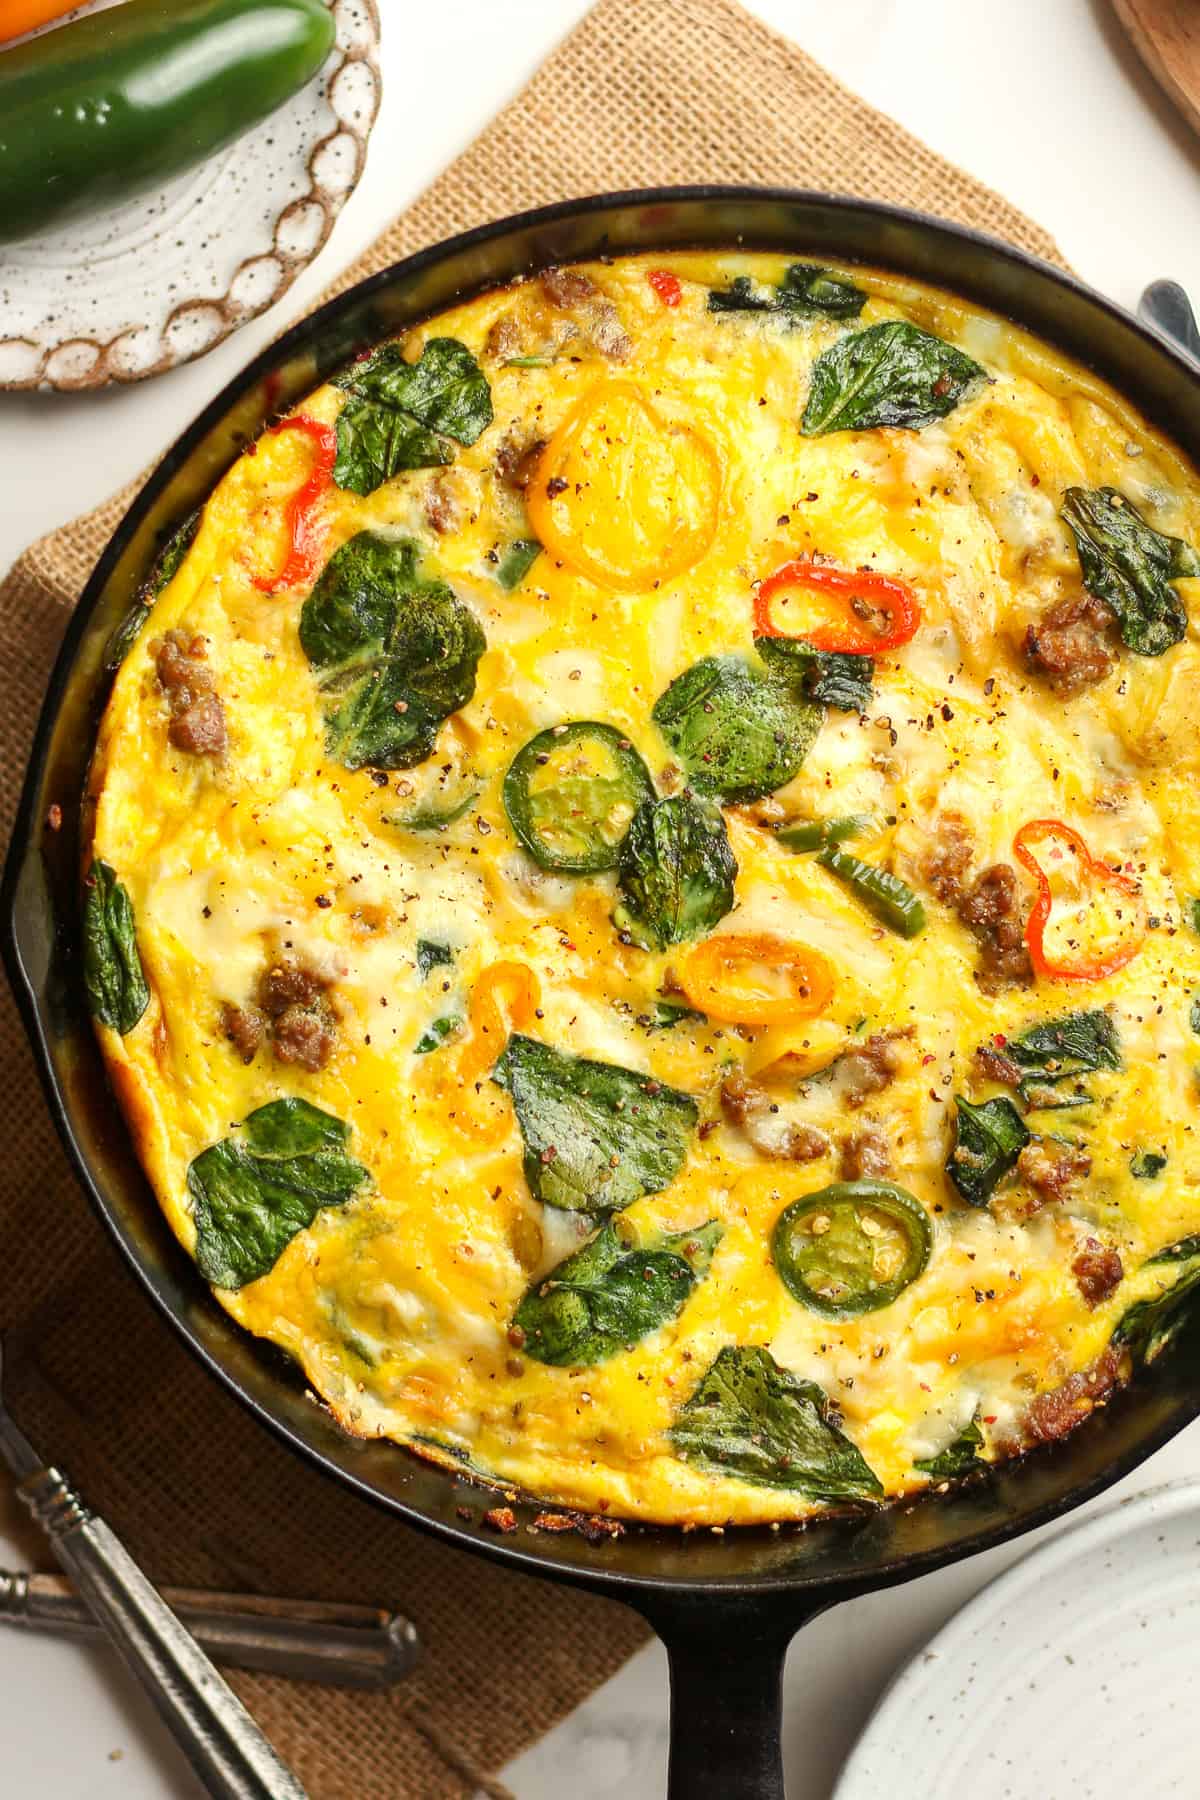 Closeup on a sausage frittata with spinach and other veggies.